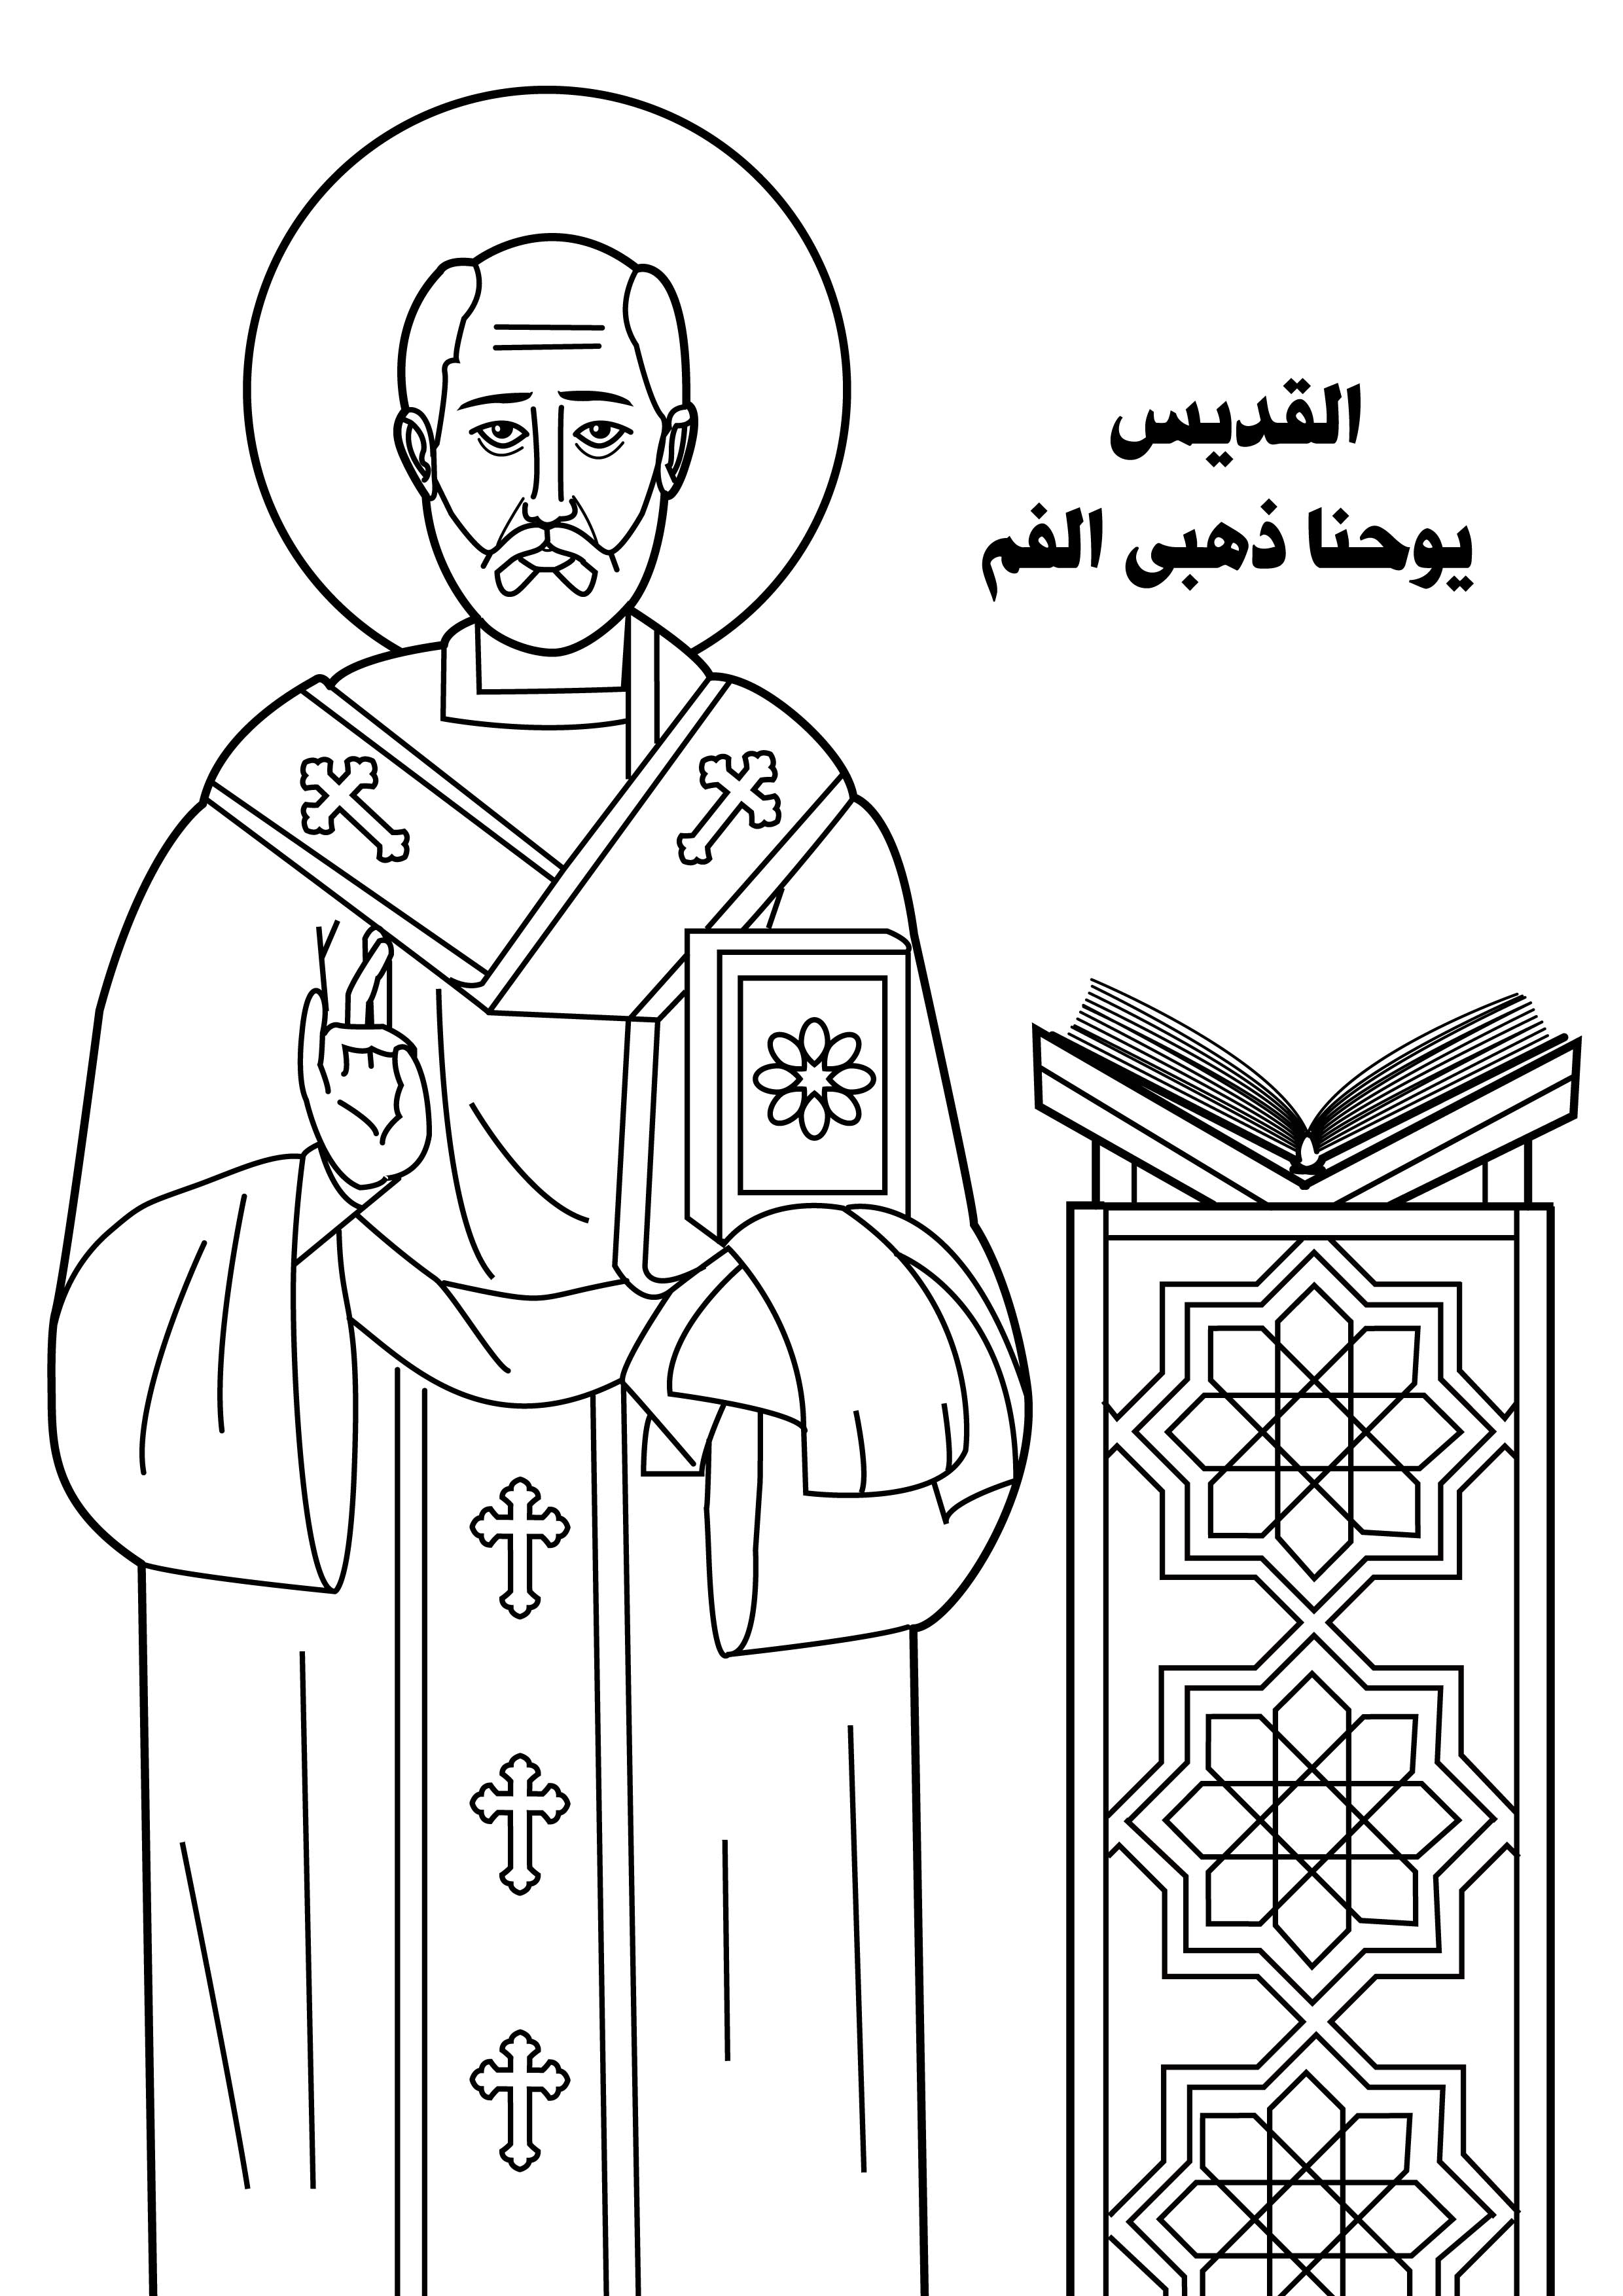 Saints Coloring Pages Catholic - High Quality Coloring Pages